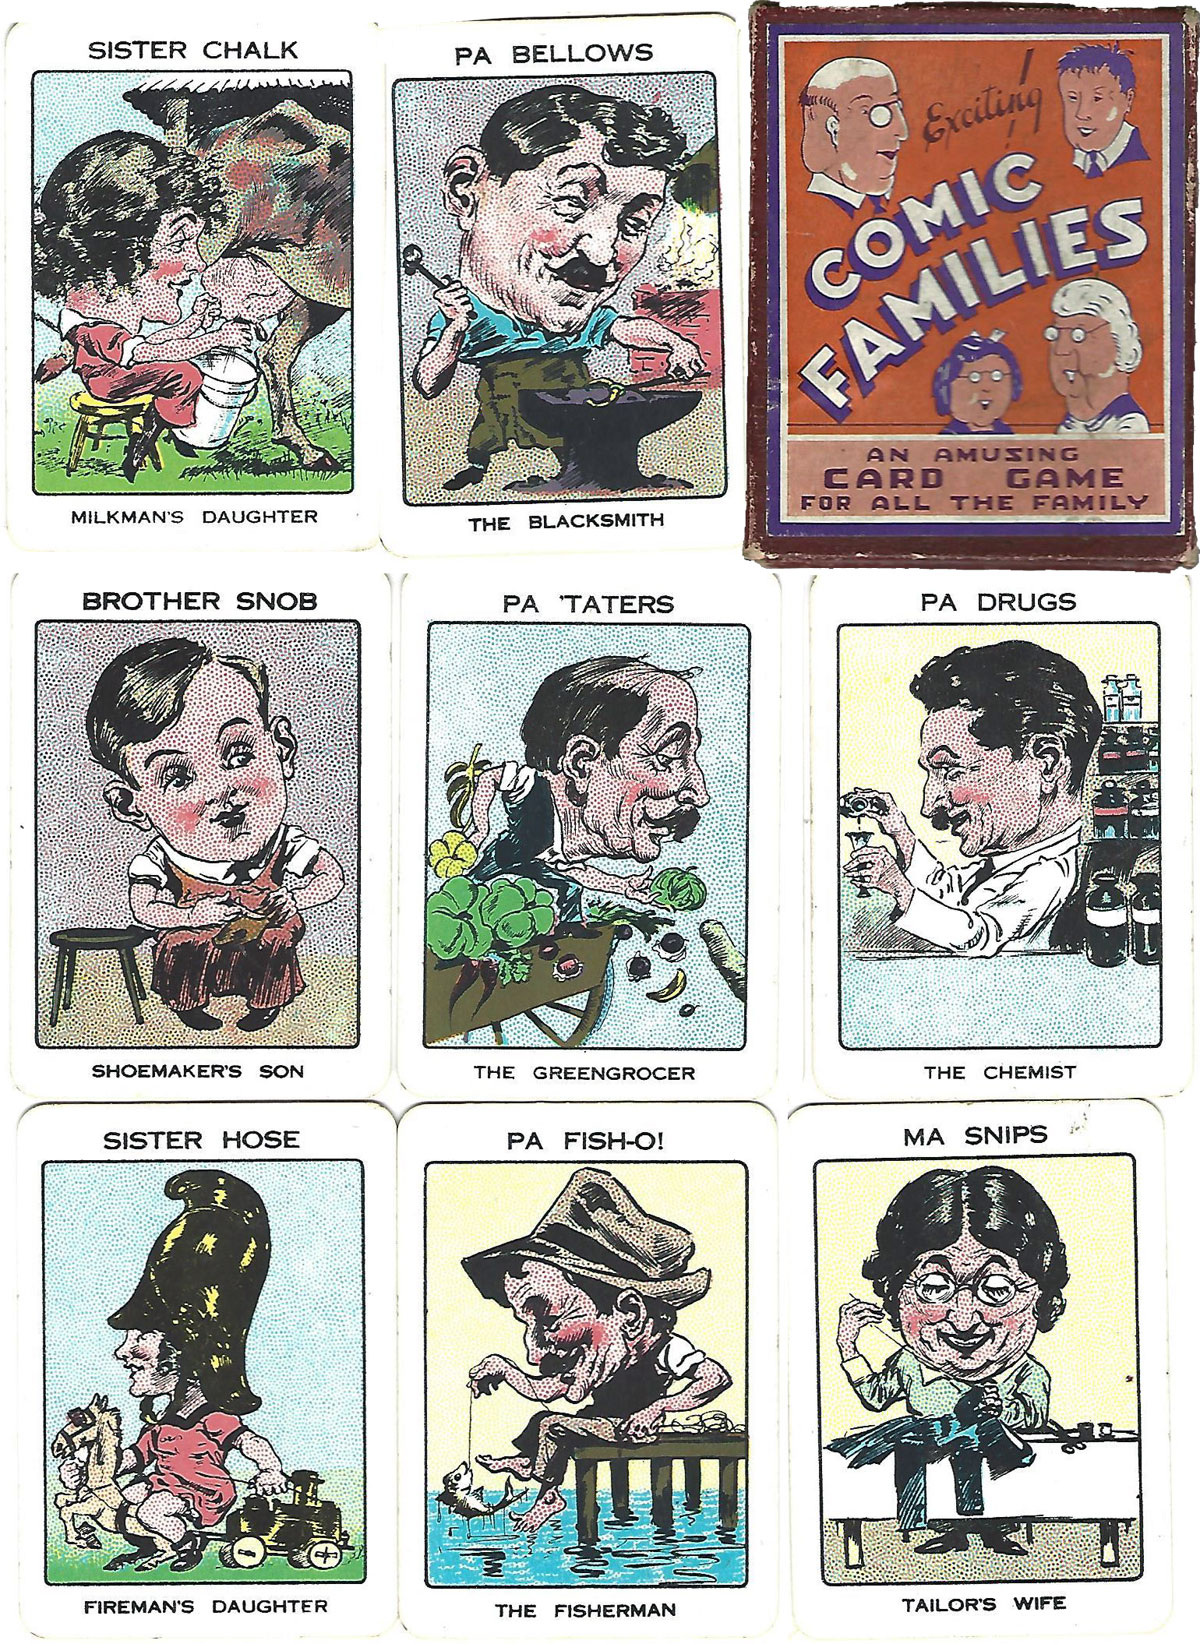 “Comic Families” children’s card game manufactured by Paper Products Pty Ltd, Melbourne, 1940s